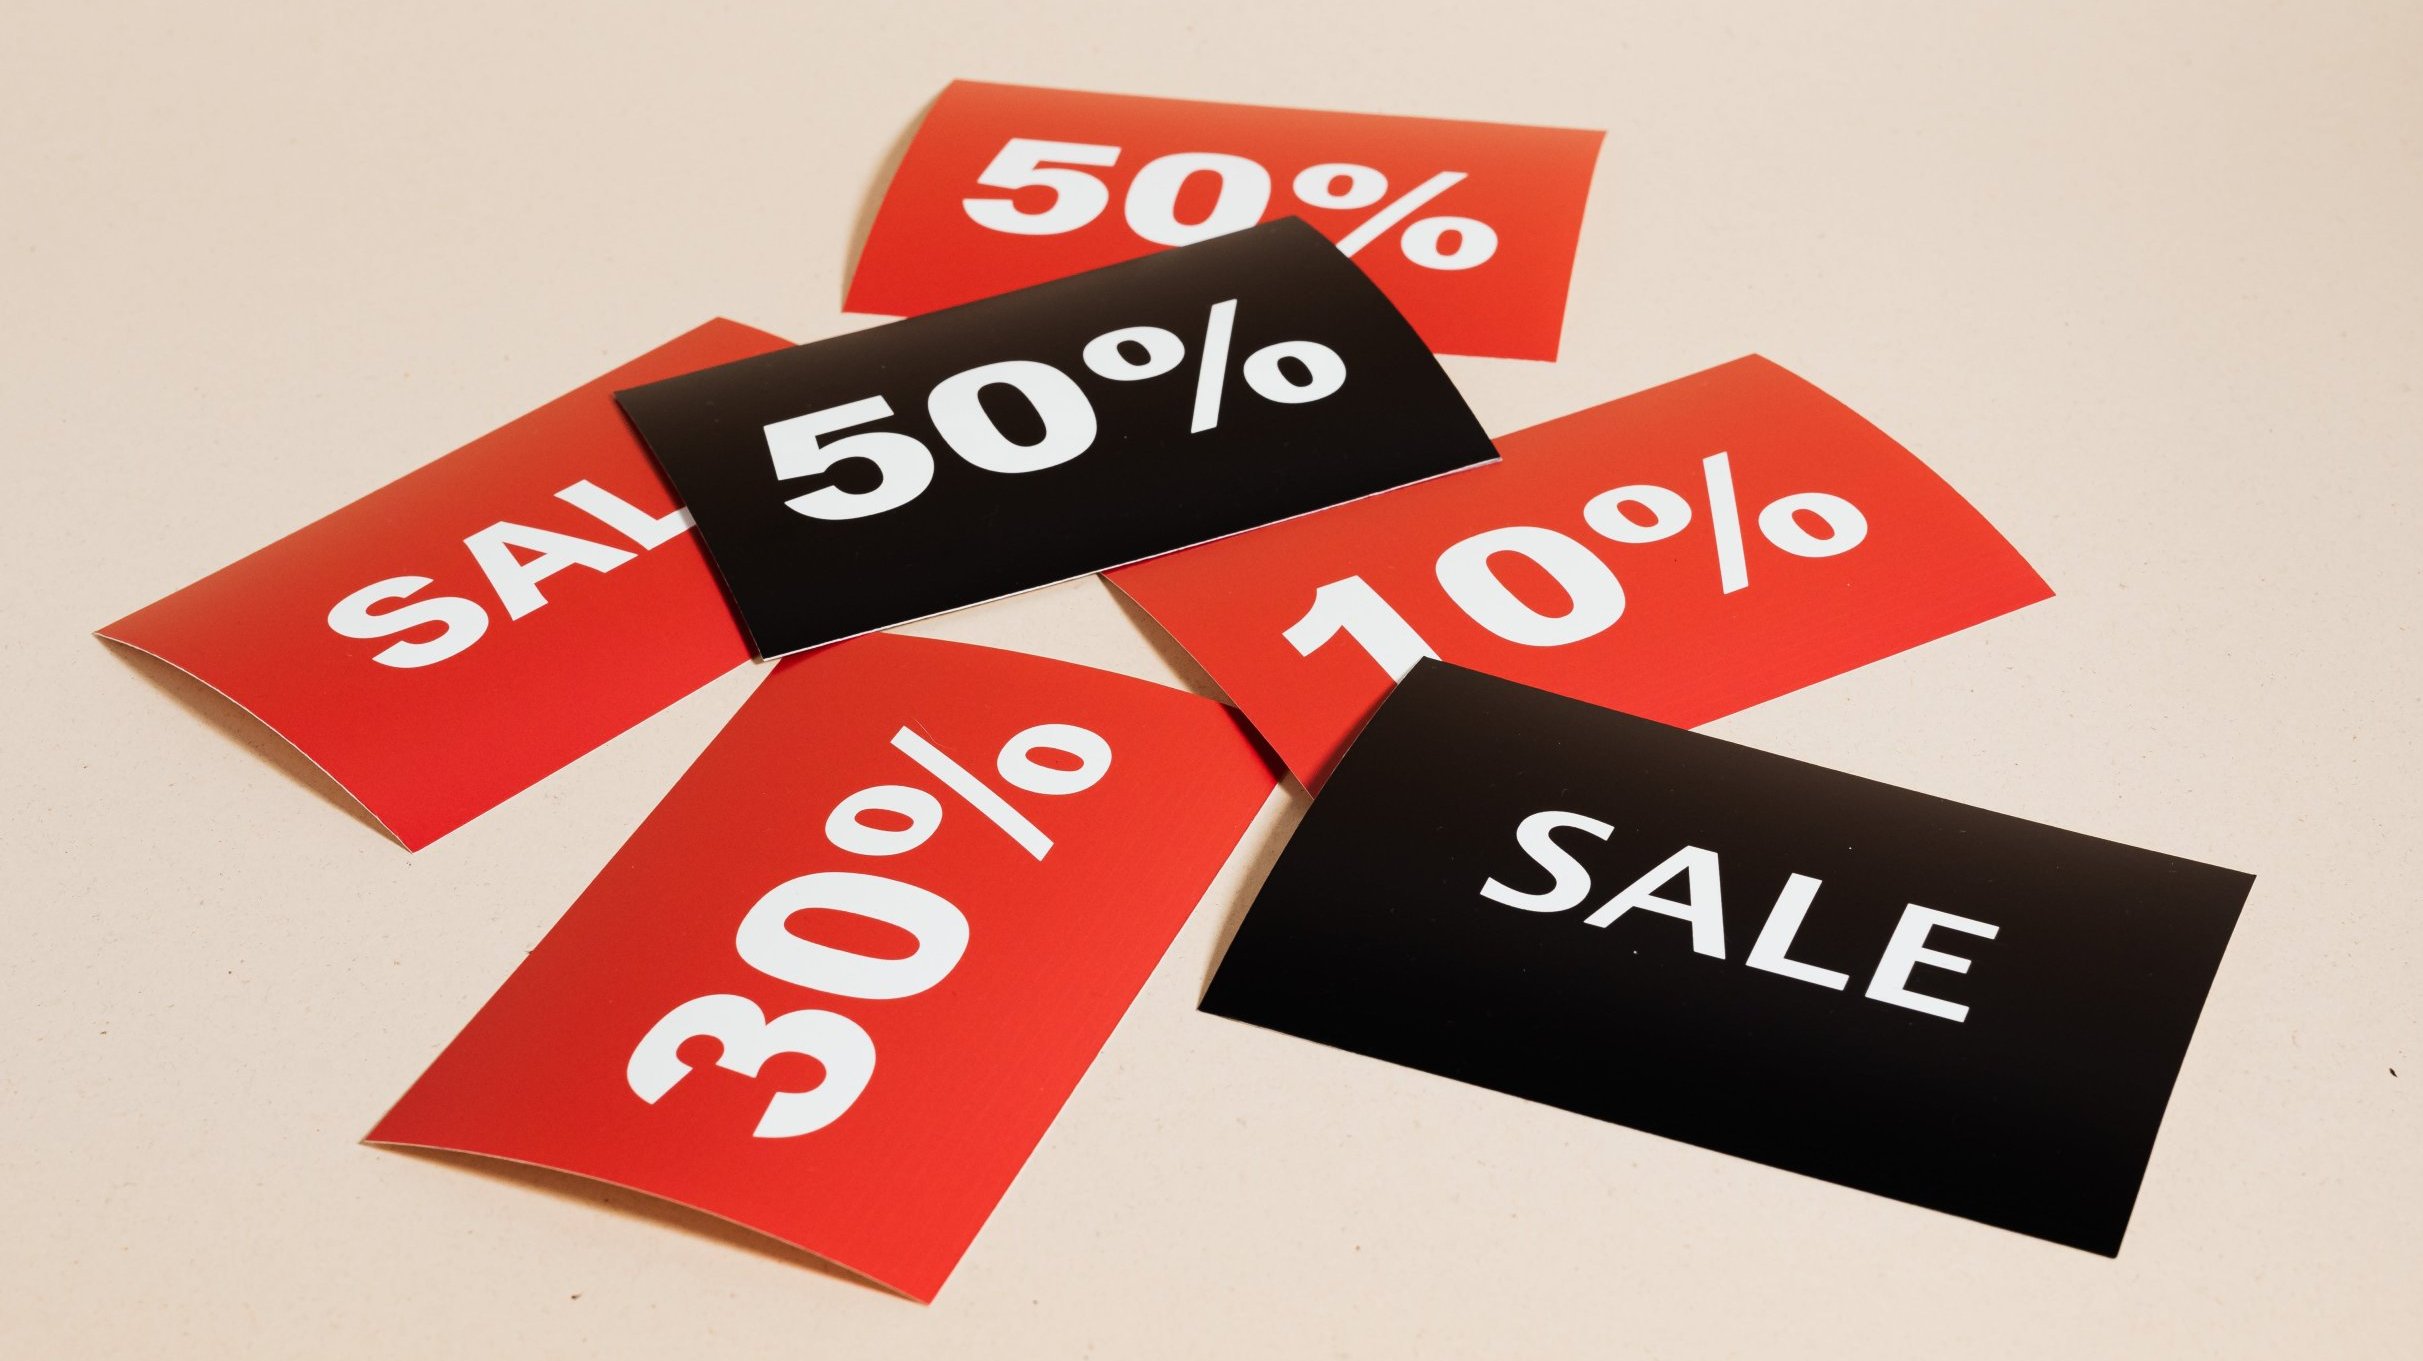 Over-reliance on discounting